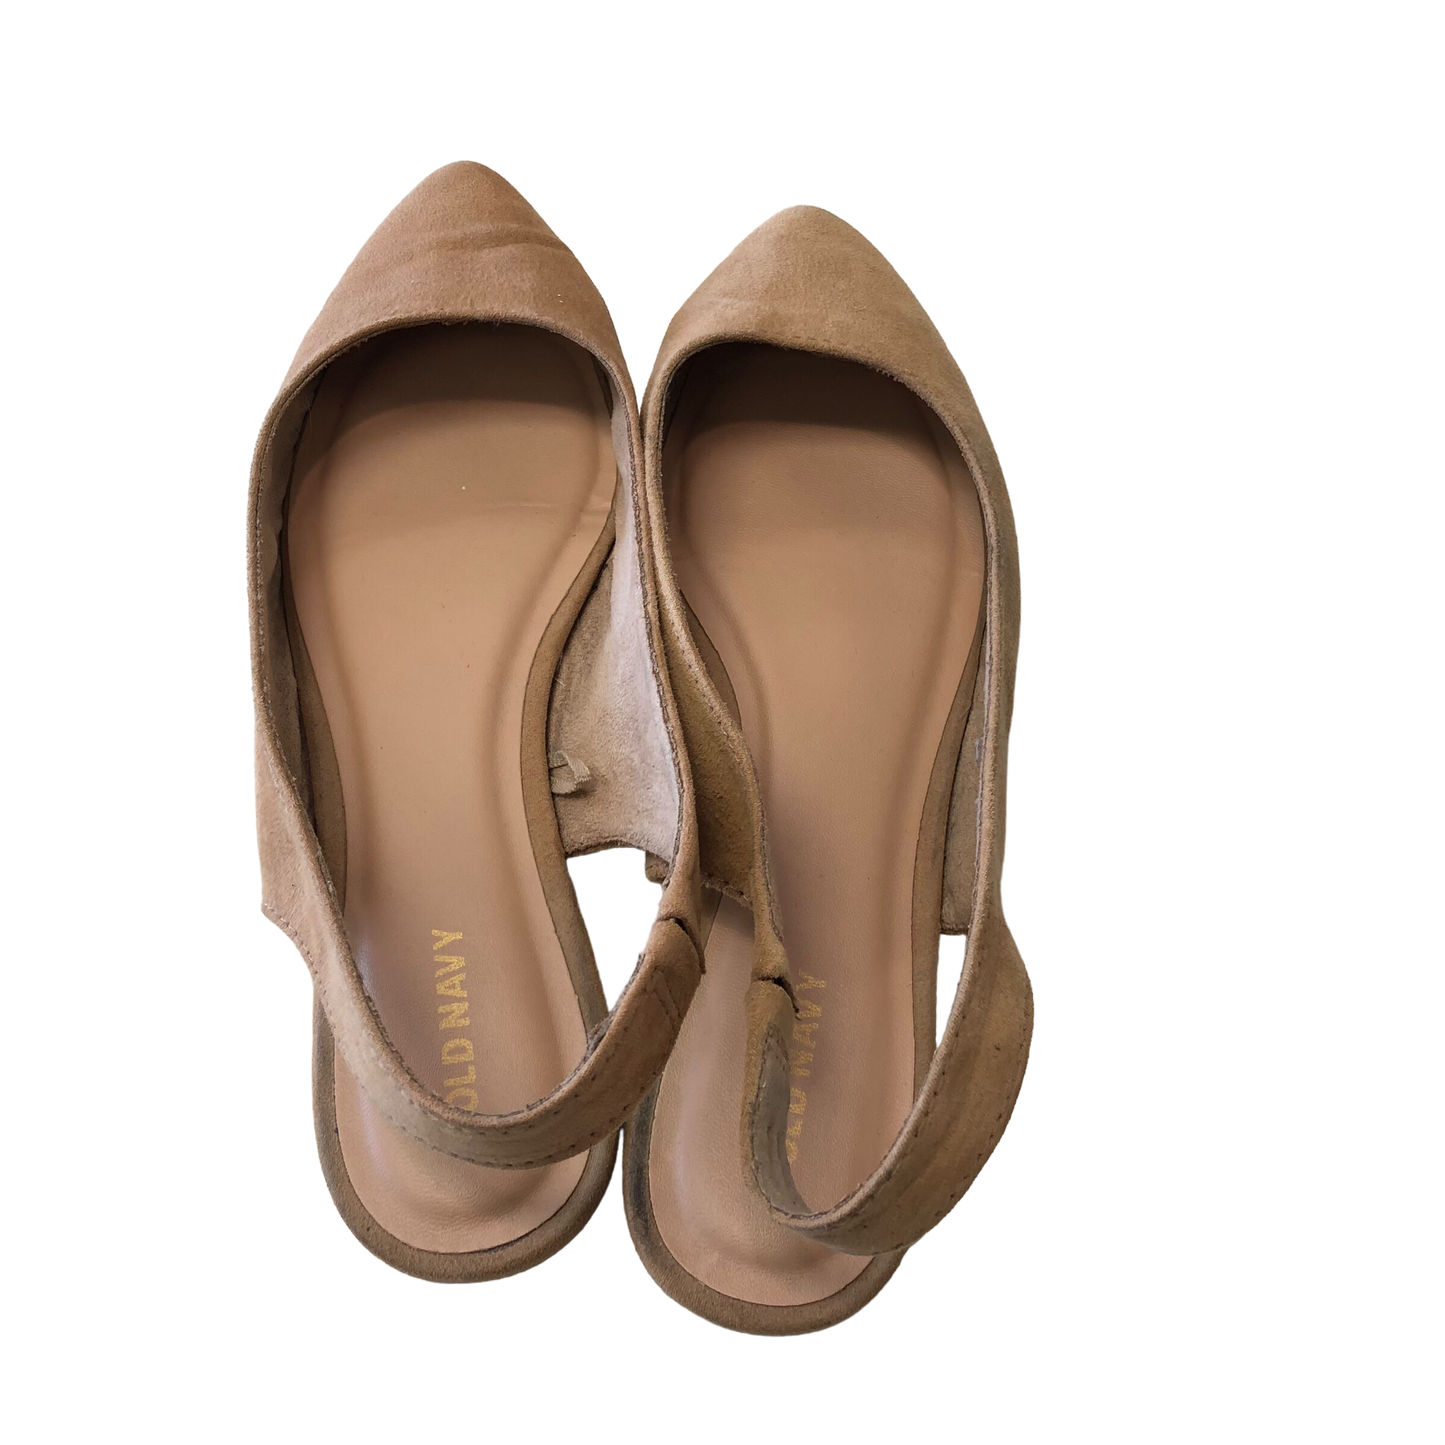 Tan Shoes Flats Ballet Old Navy, Size 8